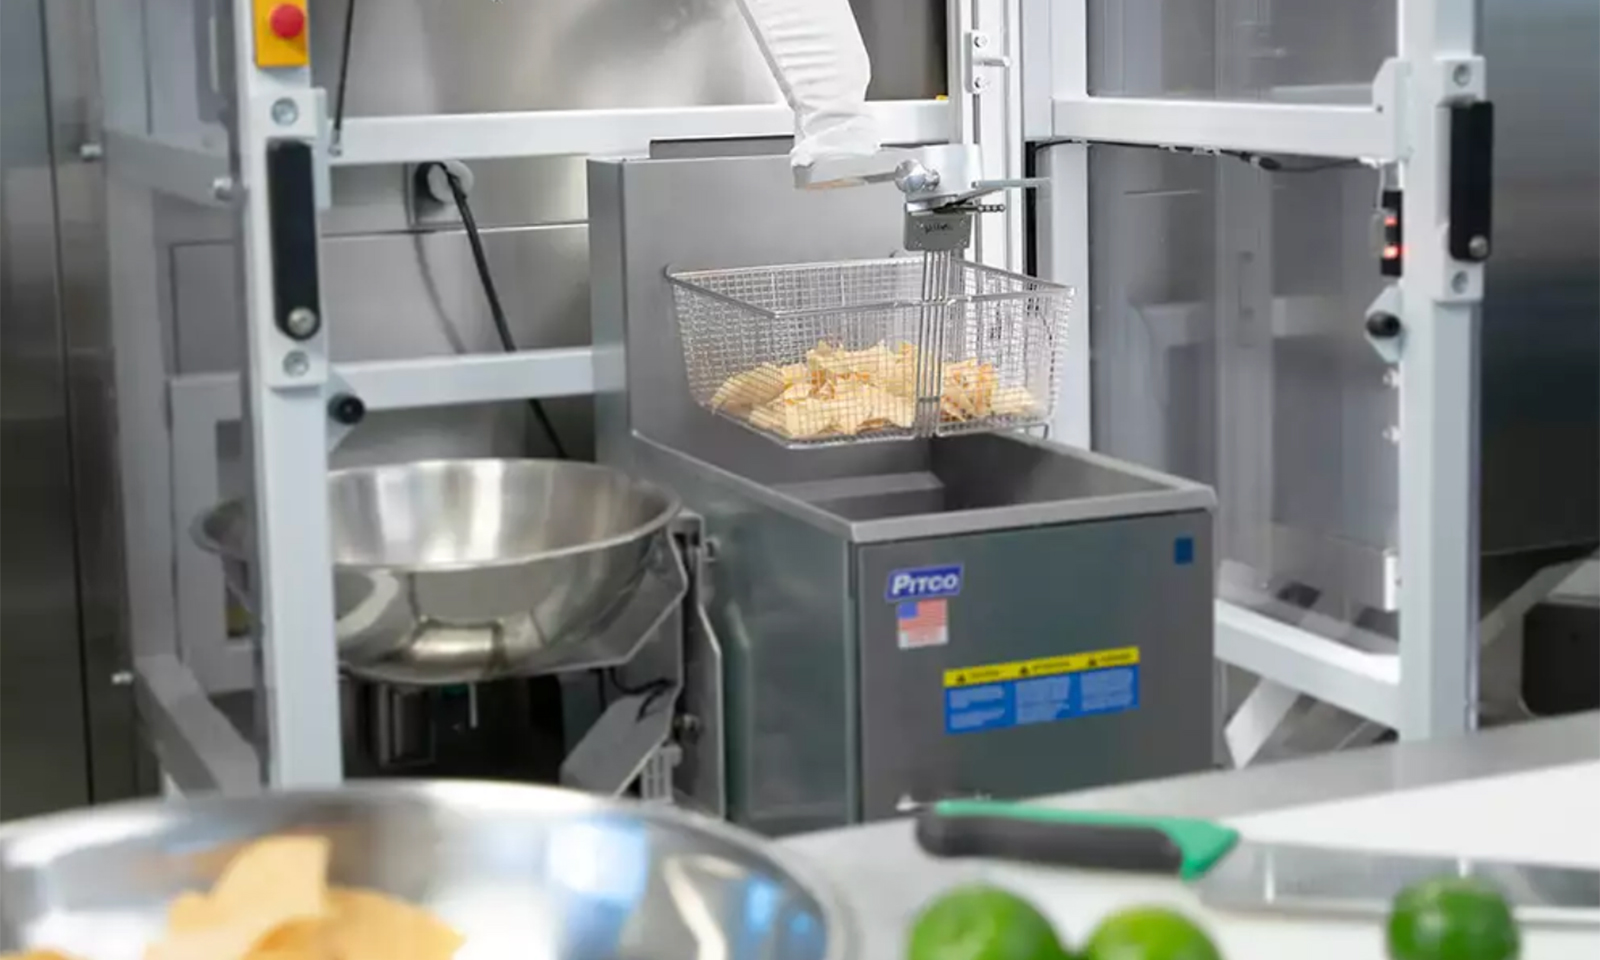 Chipotle tests out chip-making robot